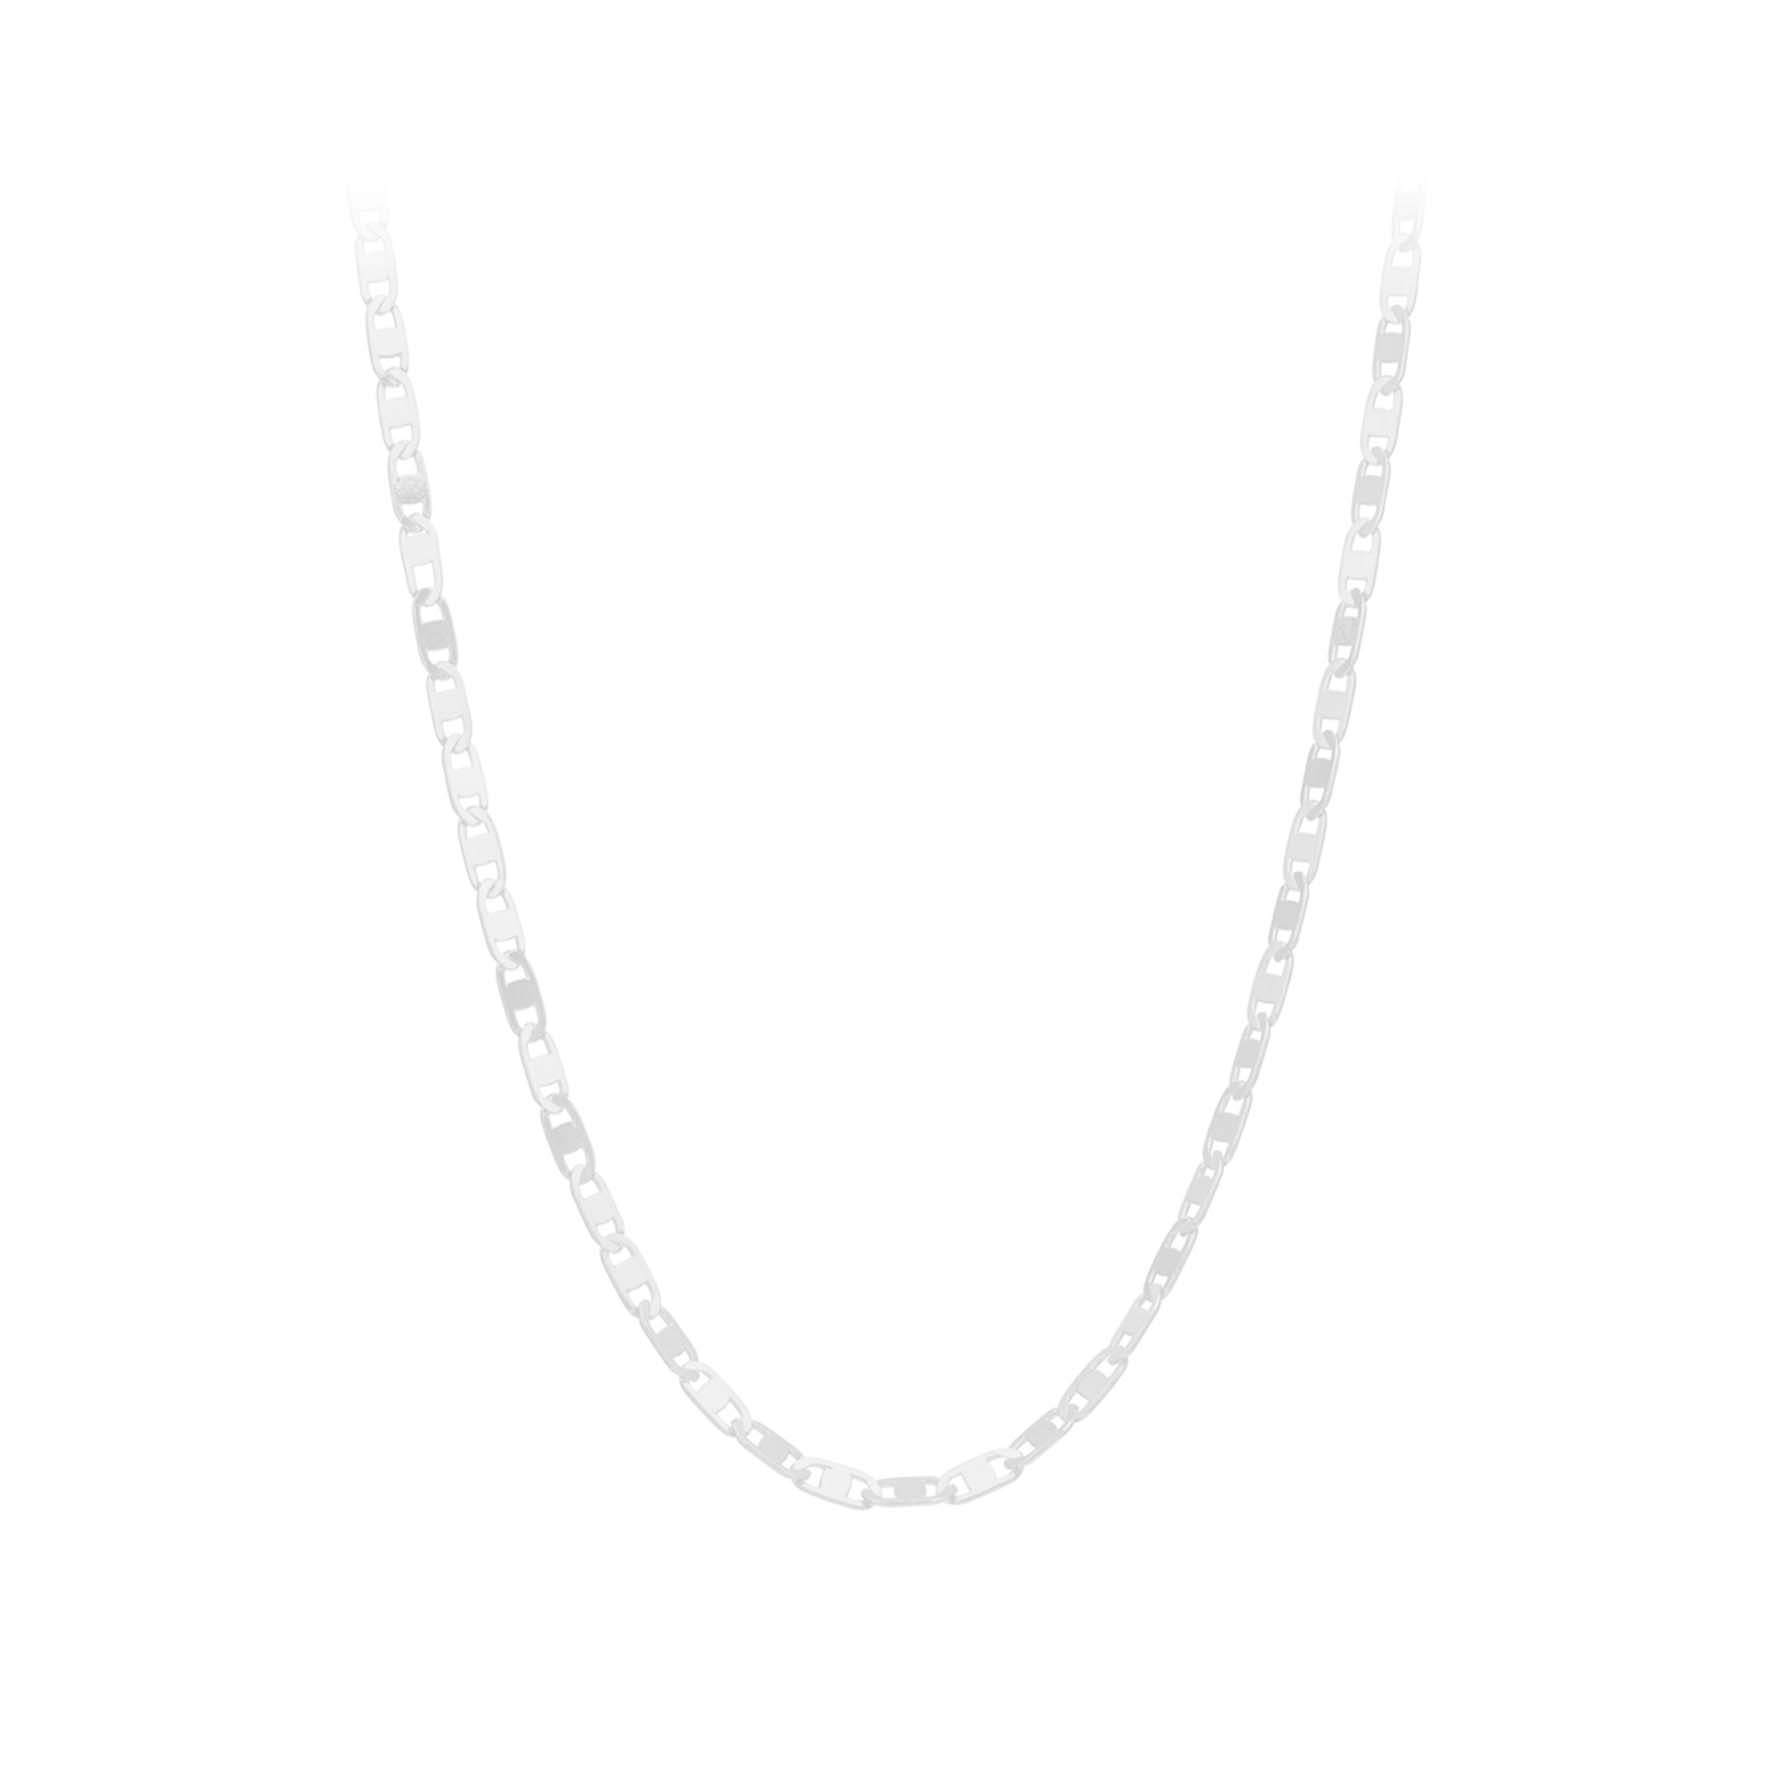 Eileen Necklace from Pernille Corydon in Silver Sterling 925